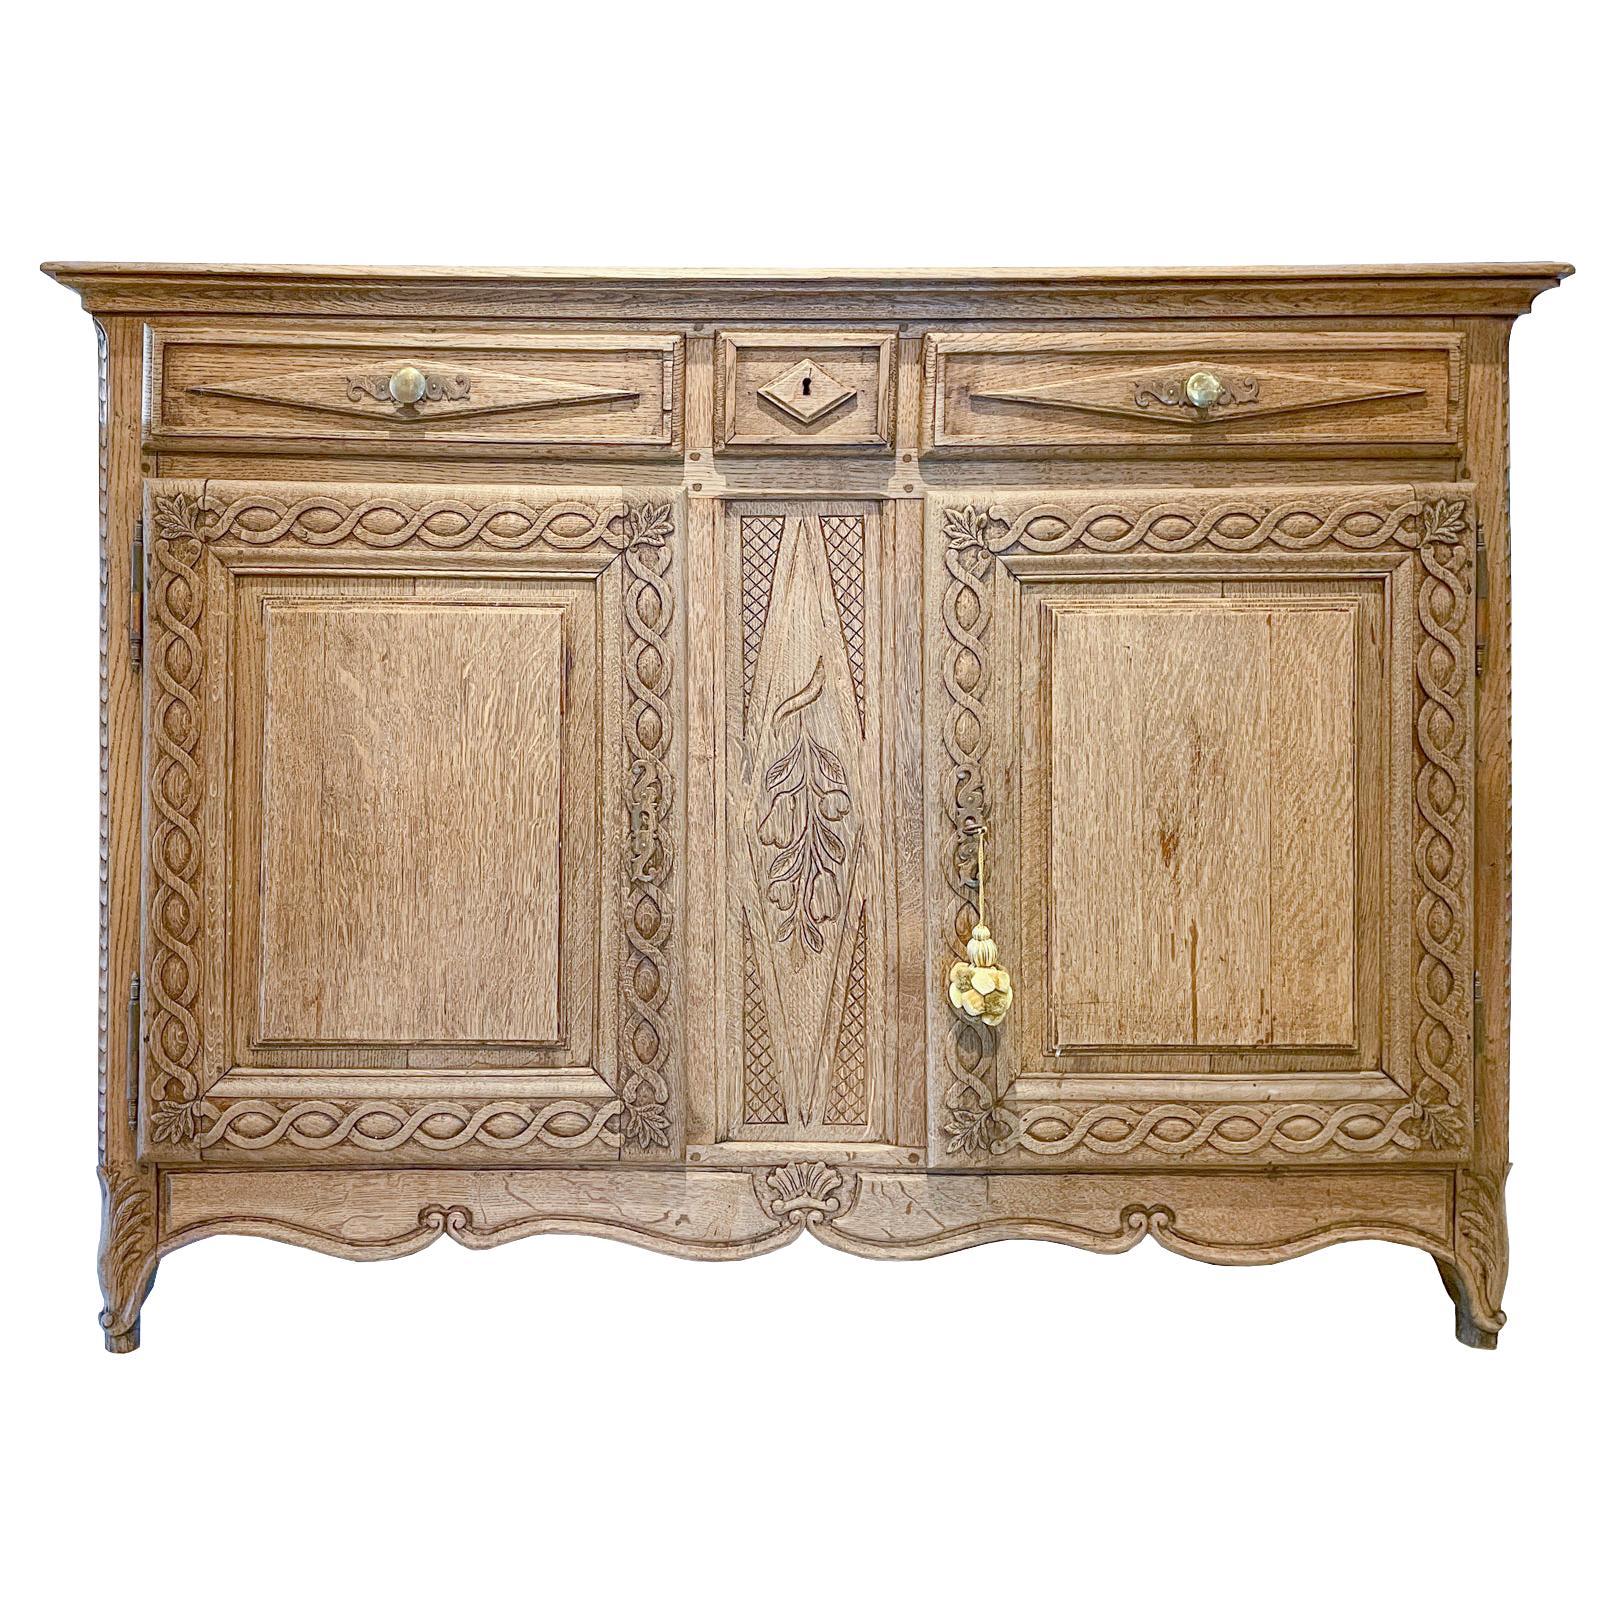 Rustic 18th C French Oak Buffet with Carved Details & Iron Hardware